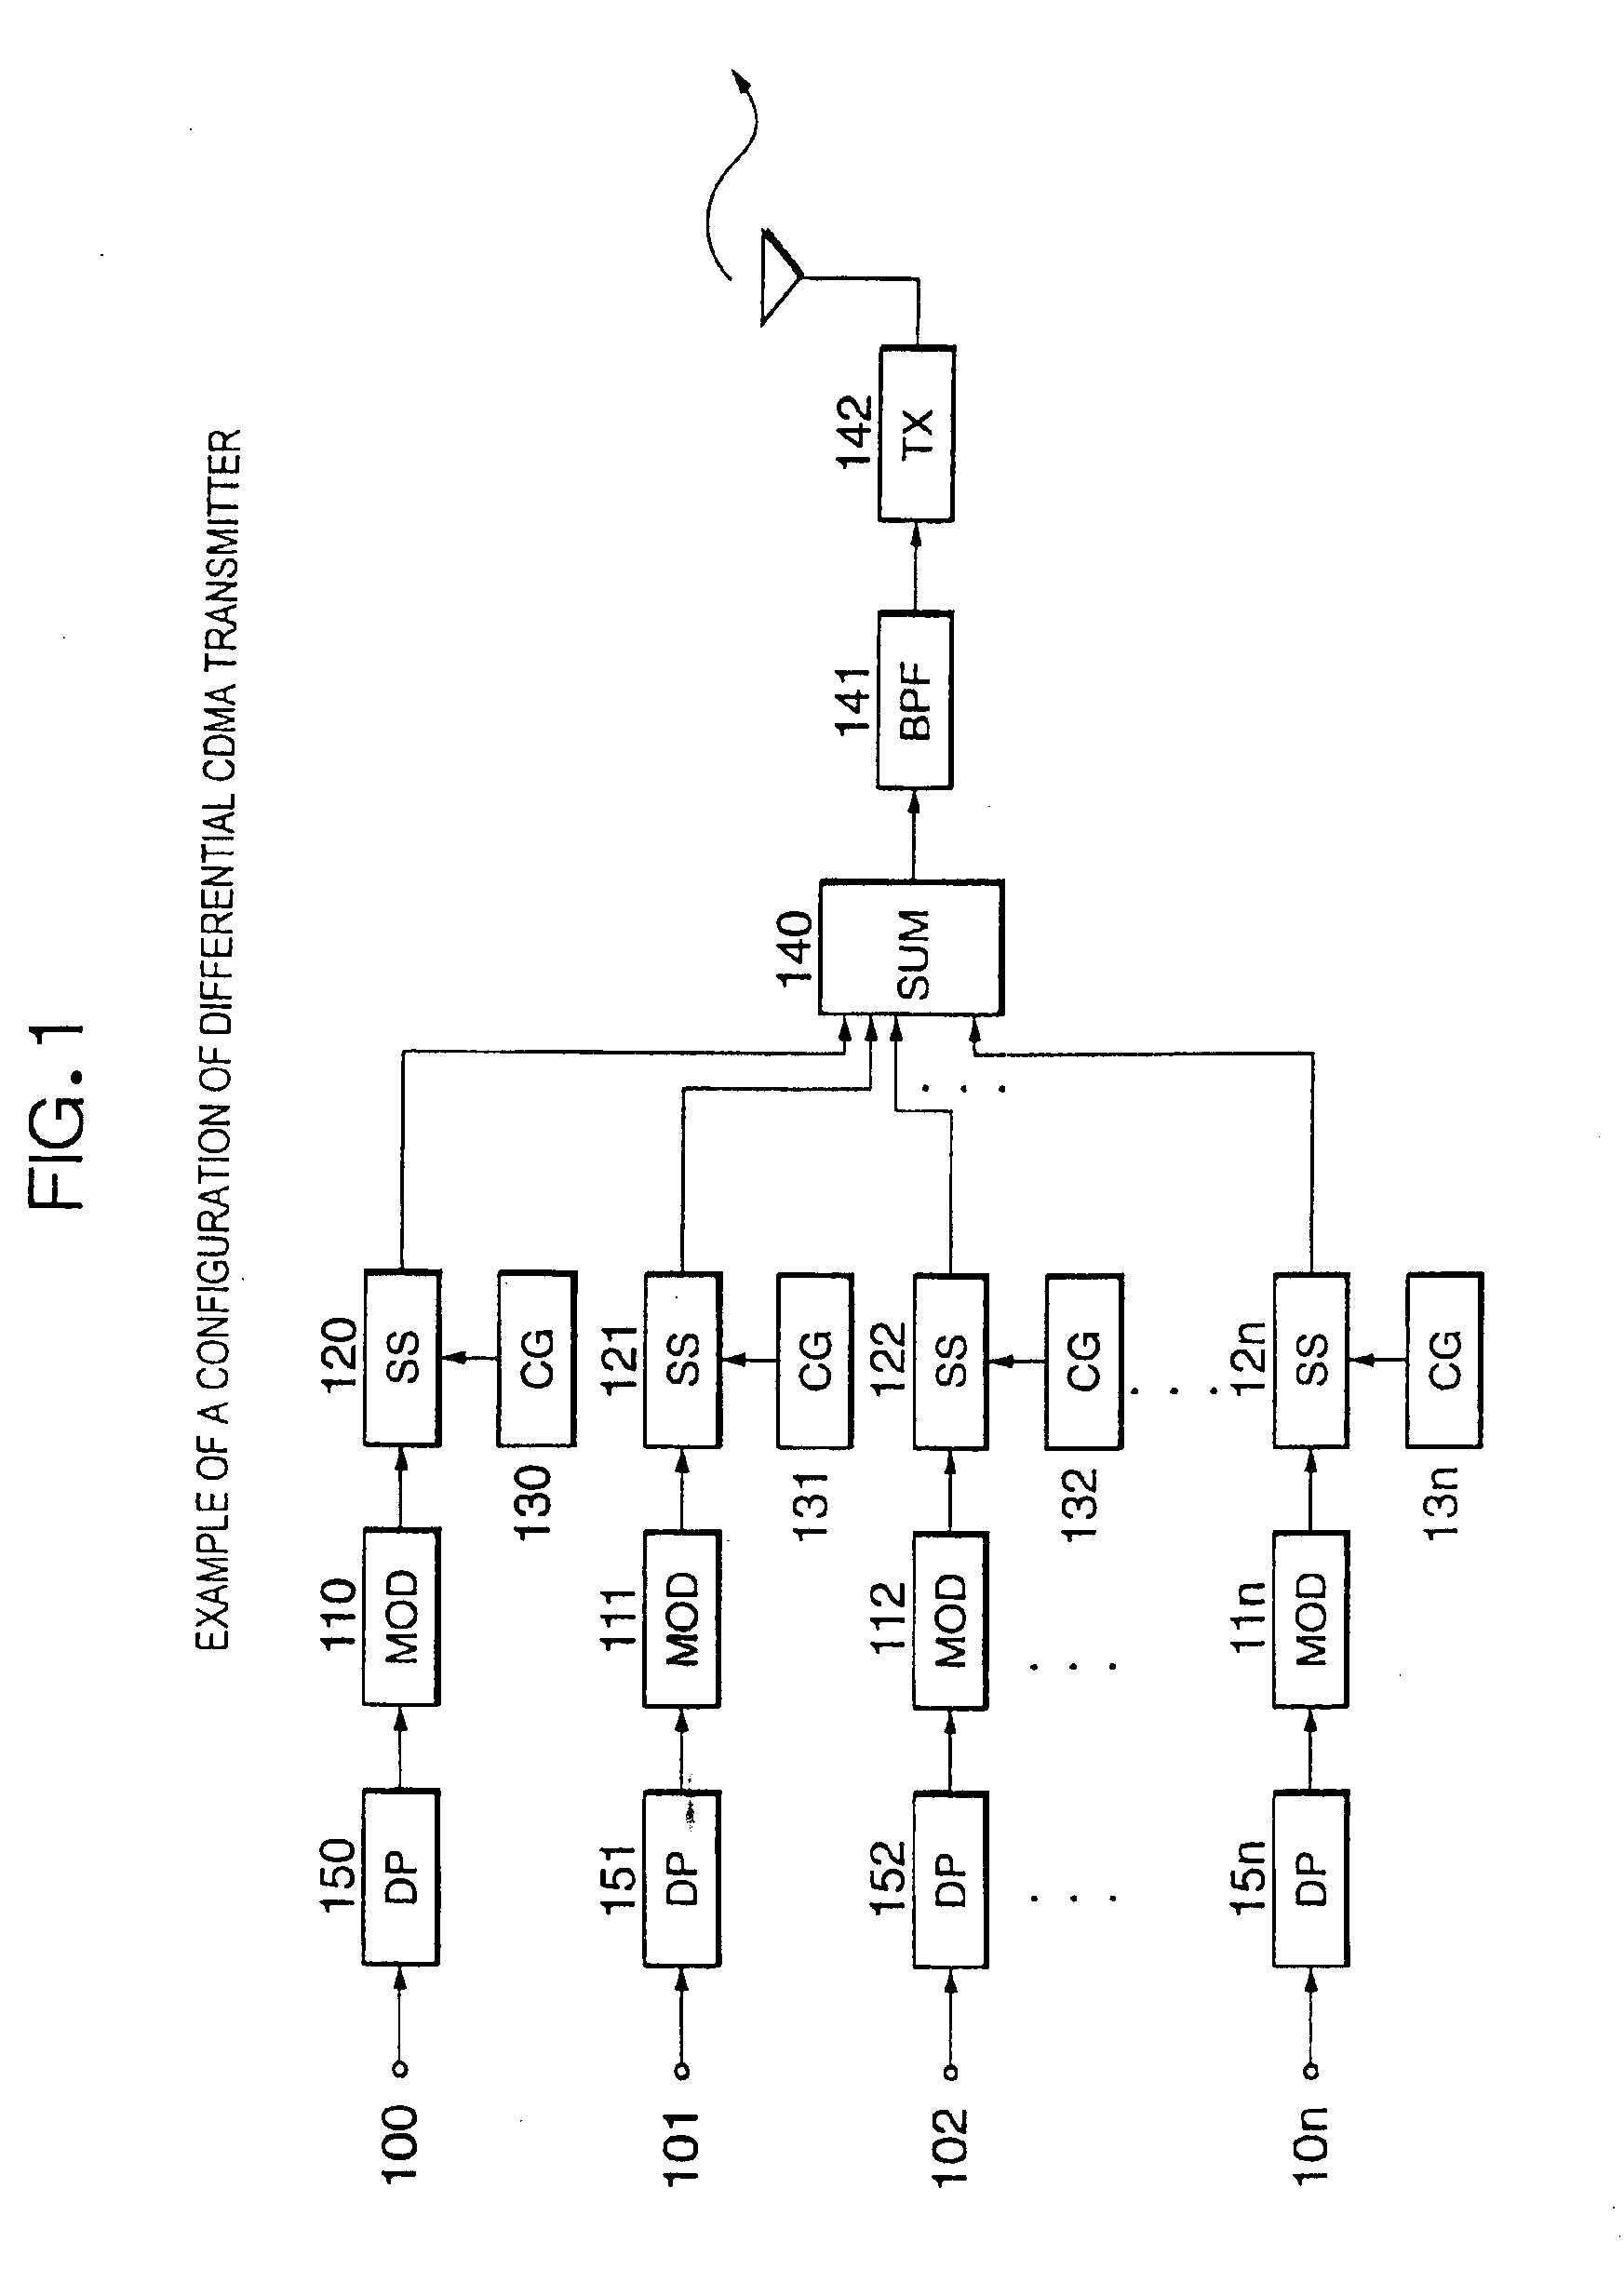 Code division multiple access (CDMA) transmission system